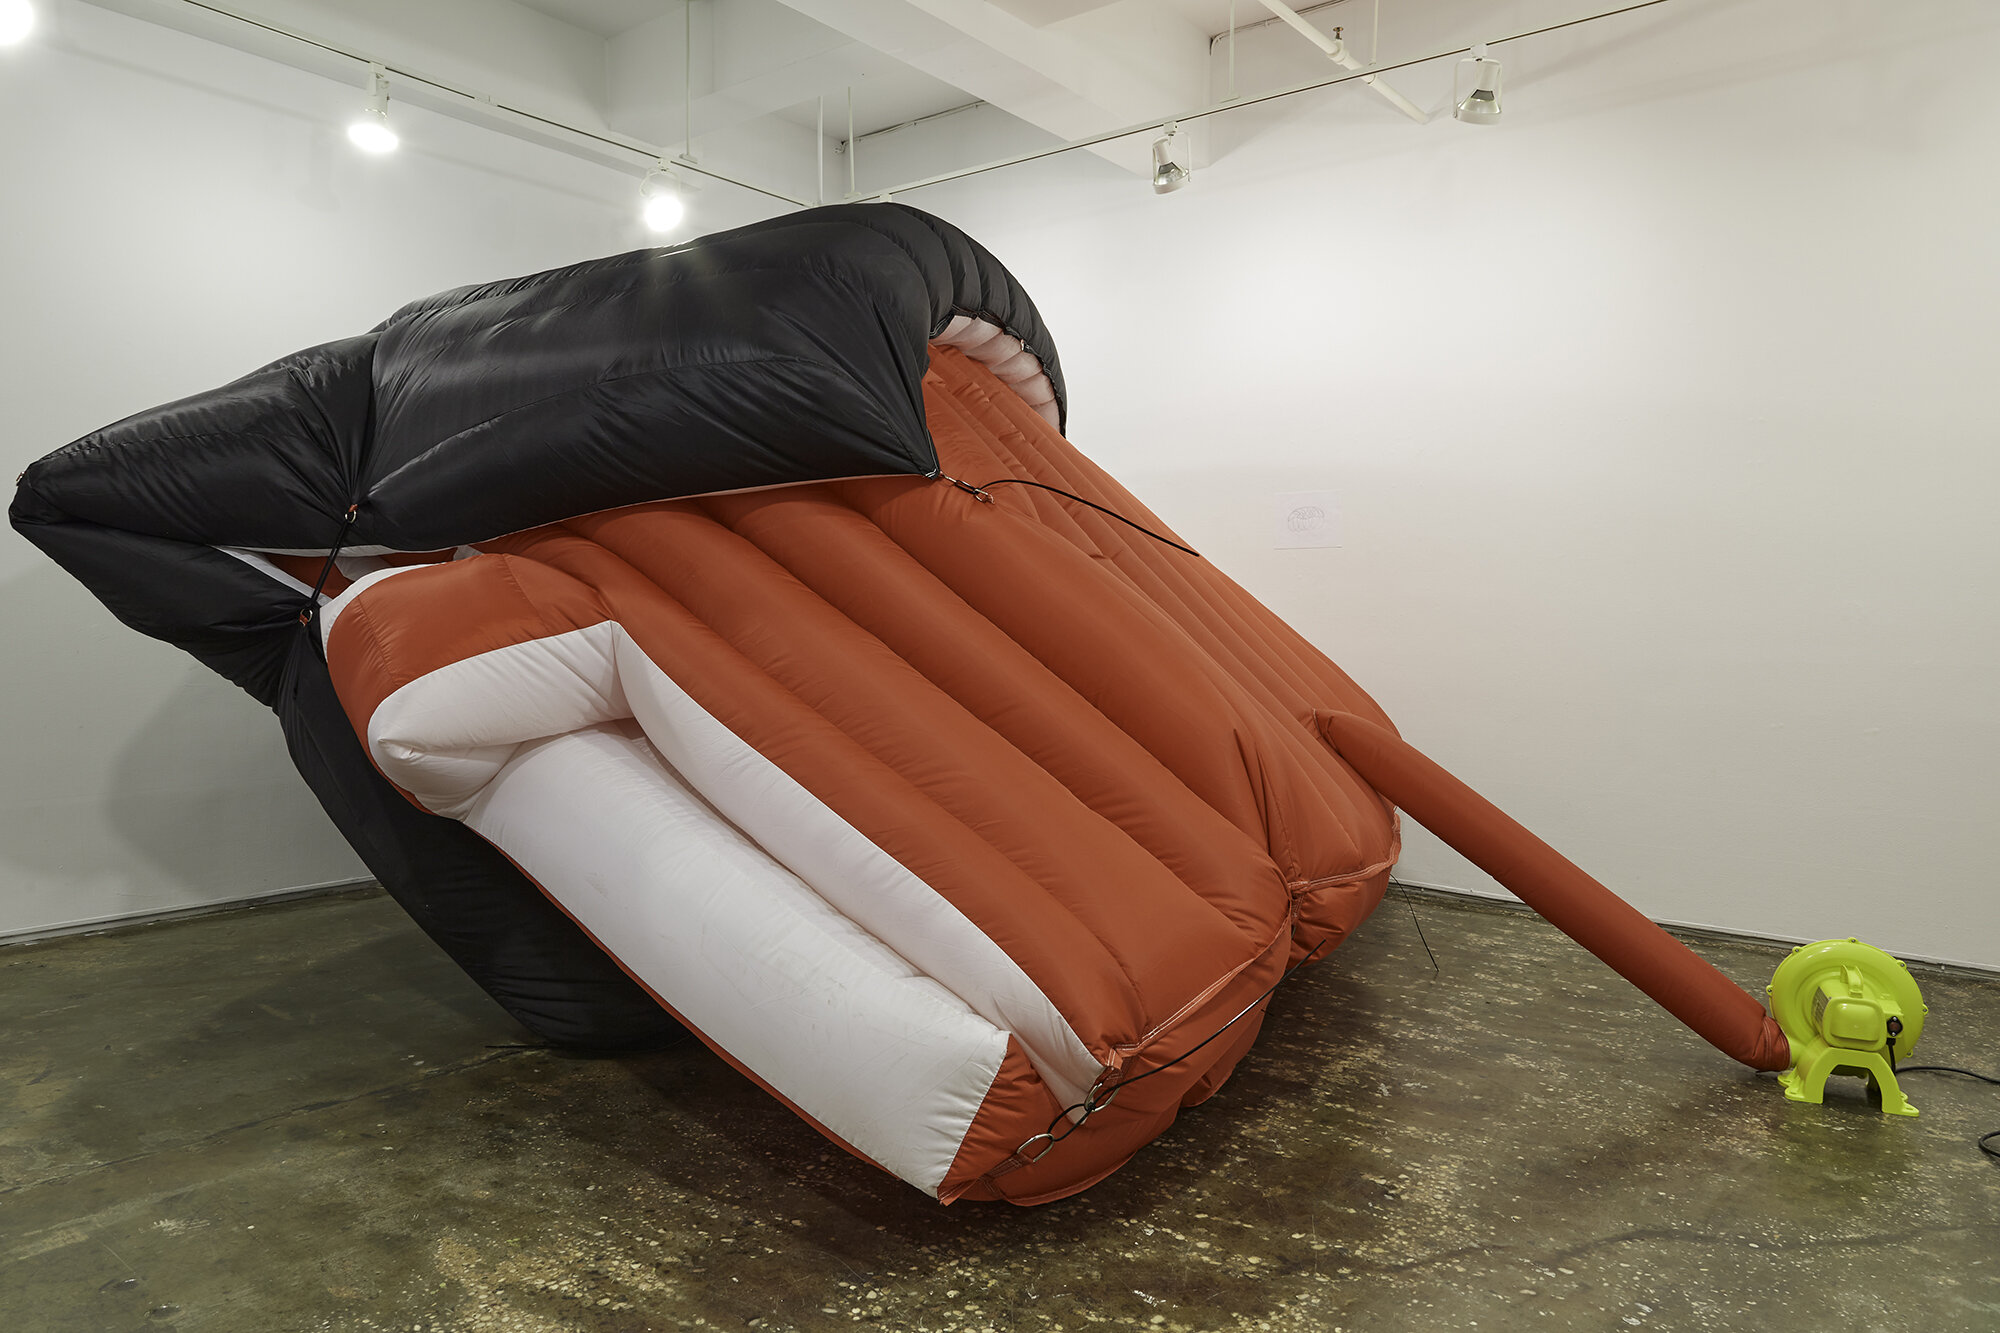  Bat-Ami Rivlin  Untitled (inflatable house, zip ties, blower) , 2021 inflatable house, zip ties, blower dimensions variable to installation Installation A.I.R. Gallery, Brooklyn, NY 06 August - 05 September 2021 Photo by Matthew Sherman   